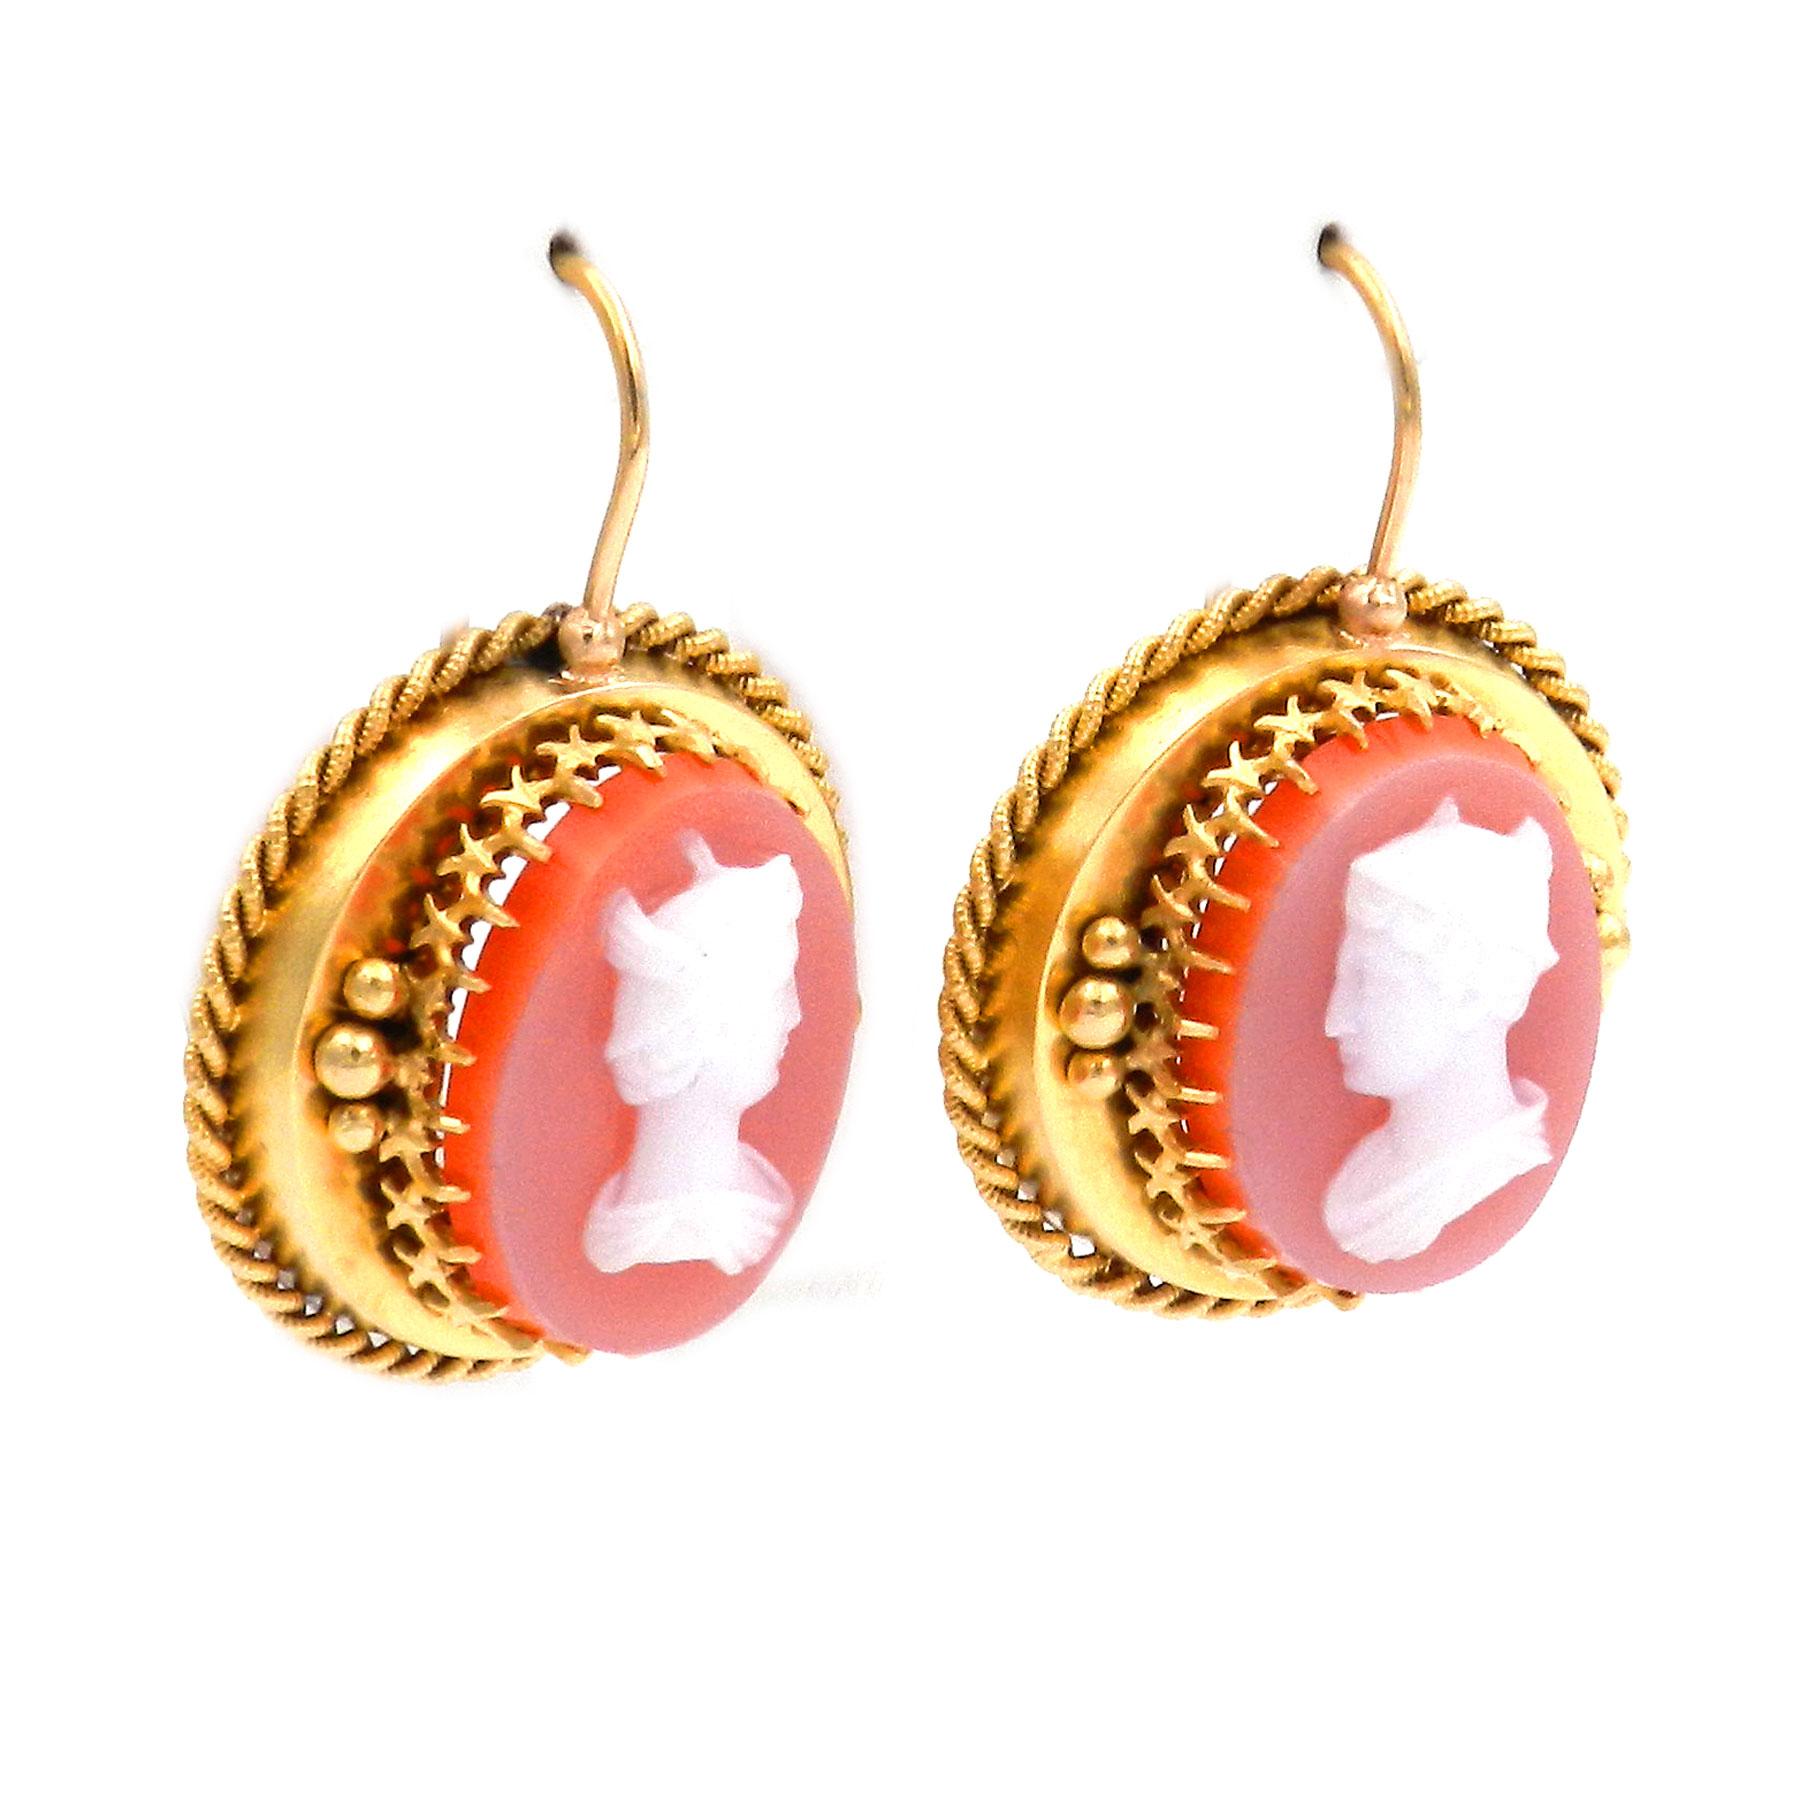 Antique Etruscan Style Agate Cameo Gold Earrings circa 1860

These decorative earrings with agate gems in the archaeological style were made around 1860 from 14K gold. A large oval agate cameo depicting the finely cut profile of Mercury is mounted